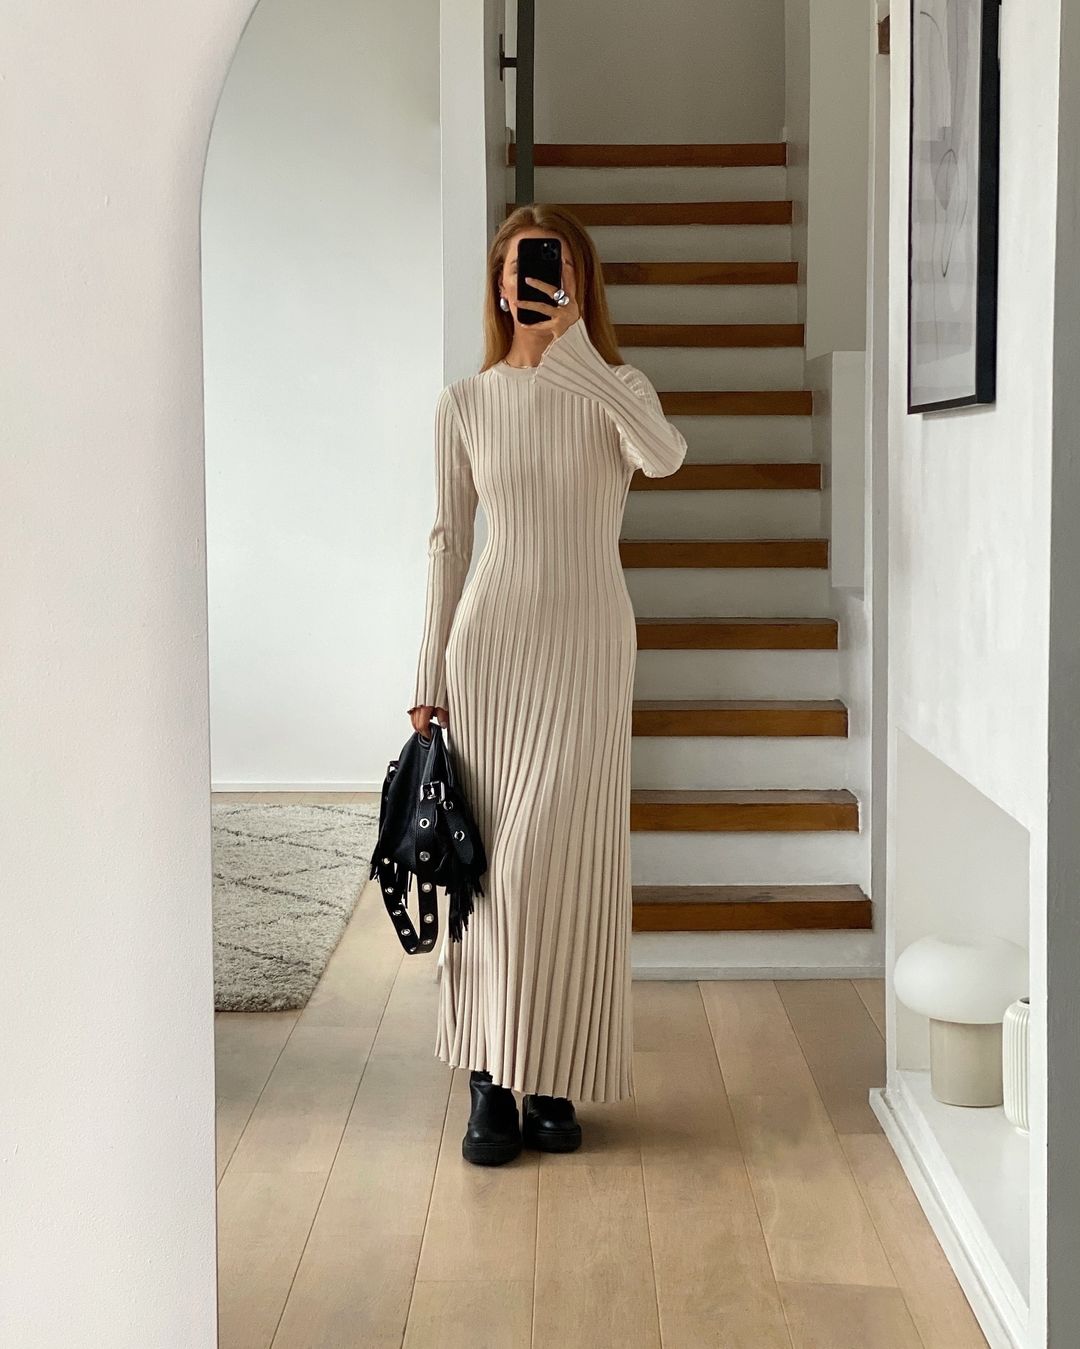 Long Sweater Dresses Are The Key To Staying Cozy And Chic